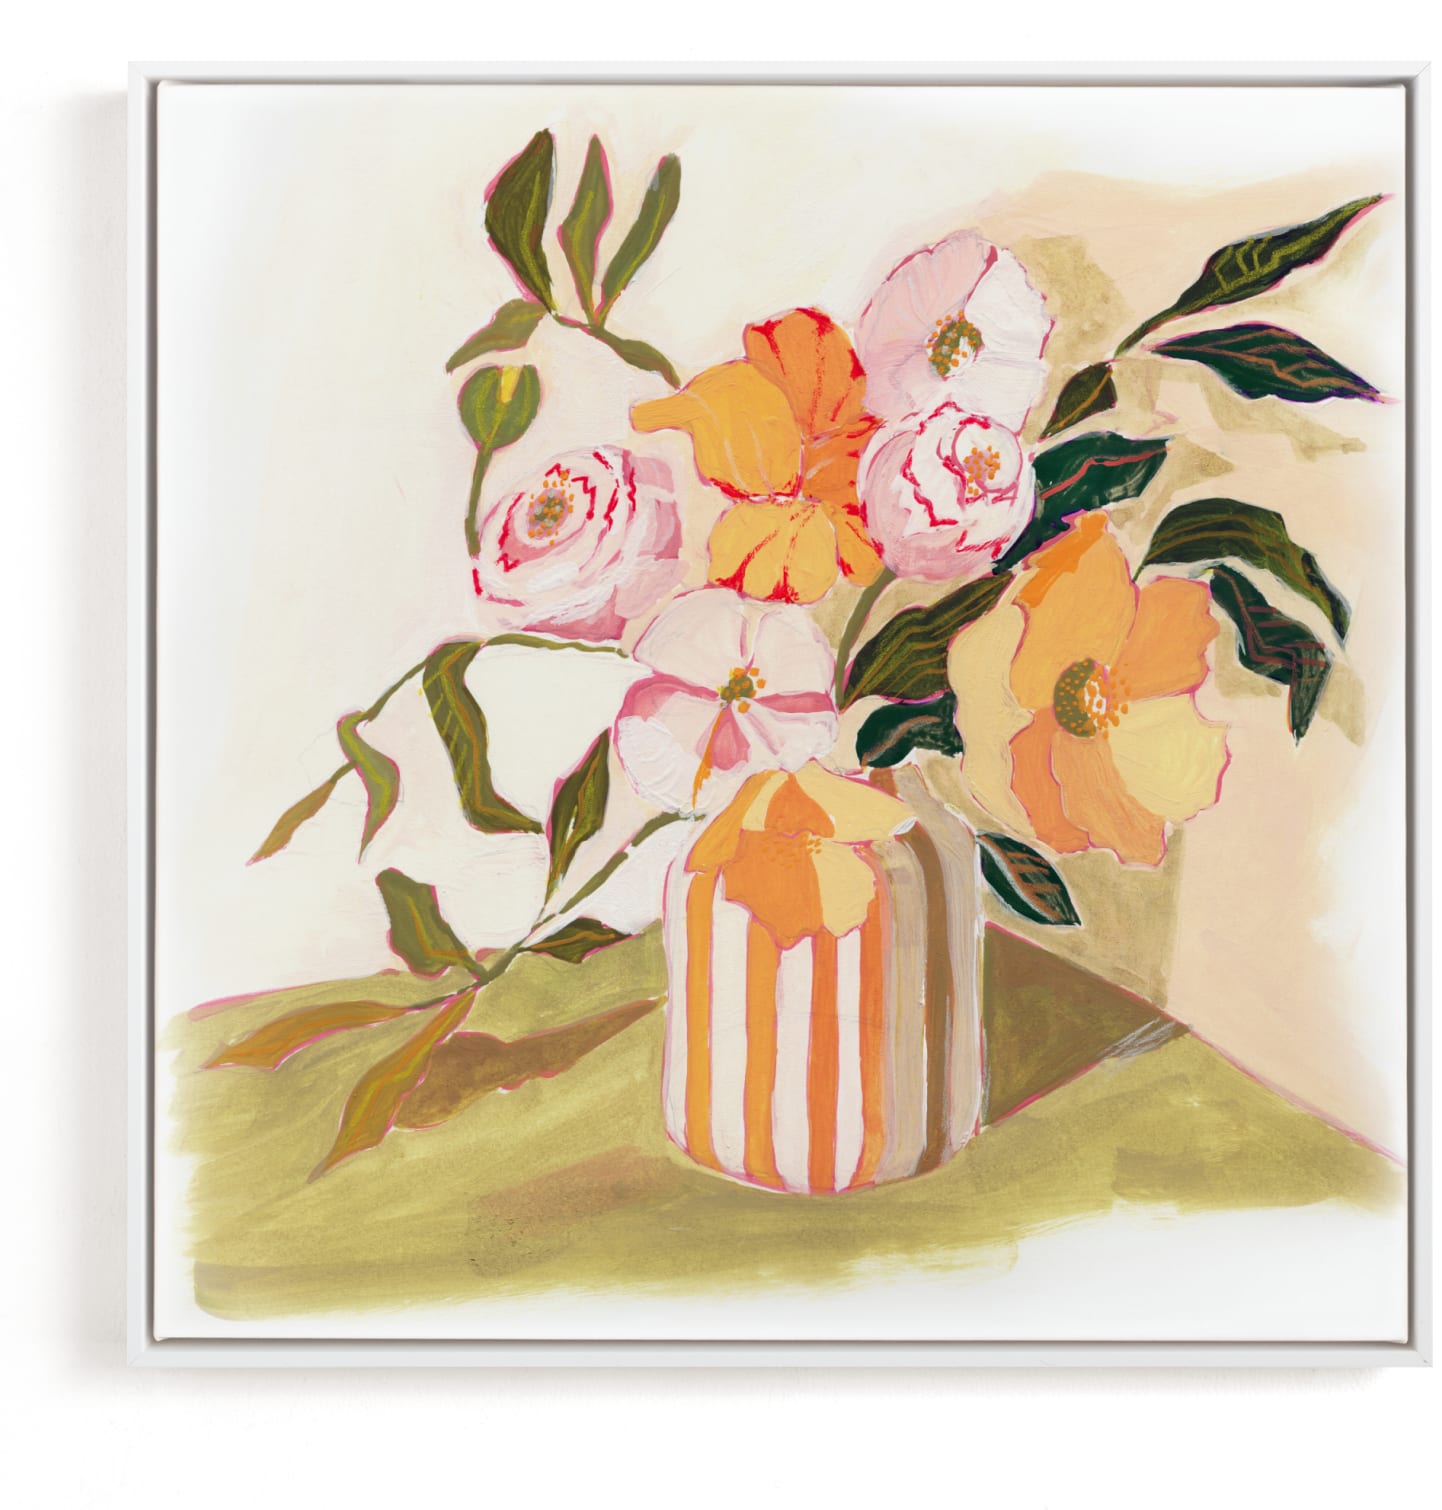 This is a pink, orange, green art by Lucrecia Caporale called Garden Flowers.